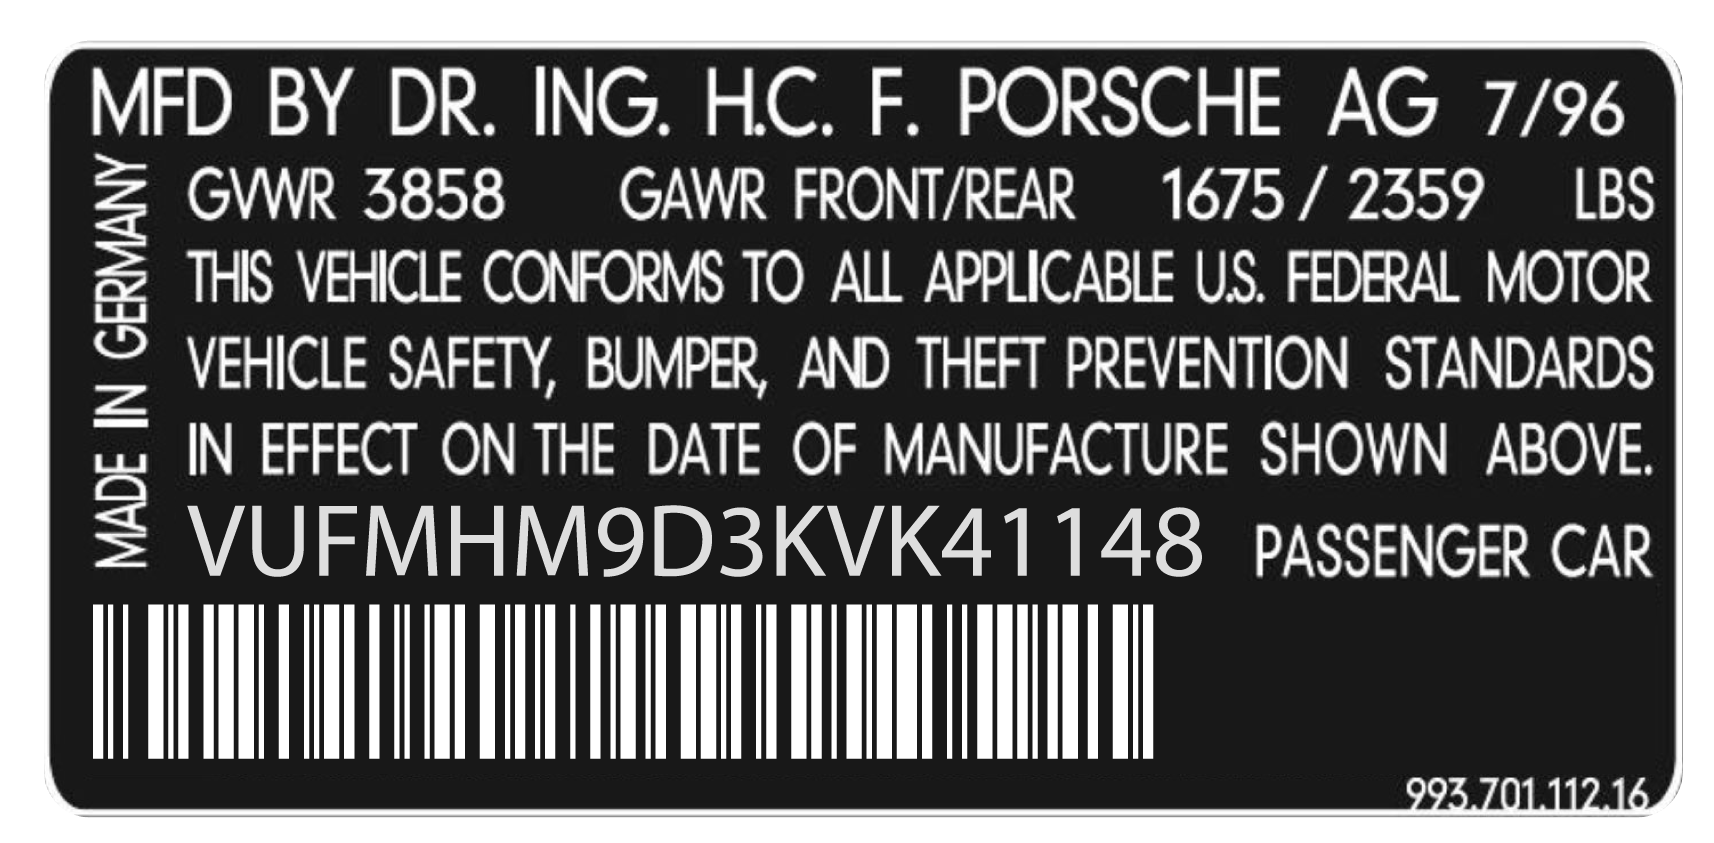 An example of a VIN barcode.